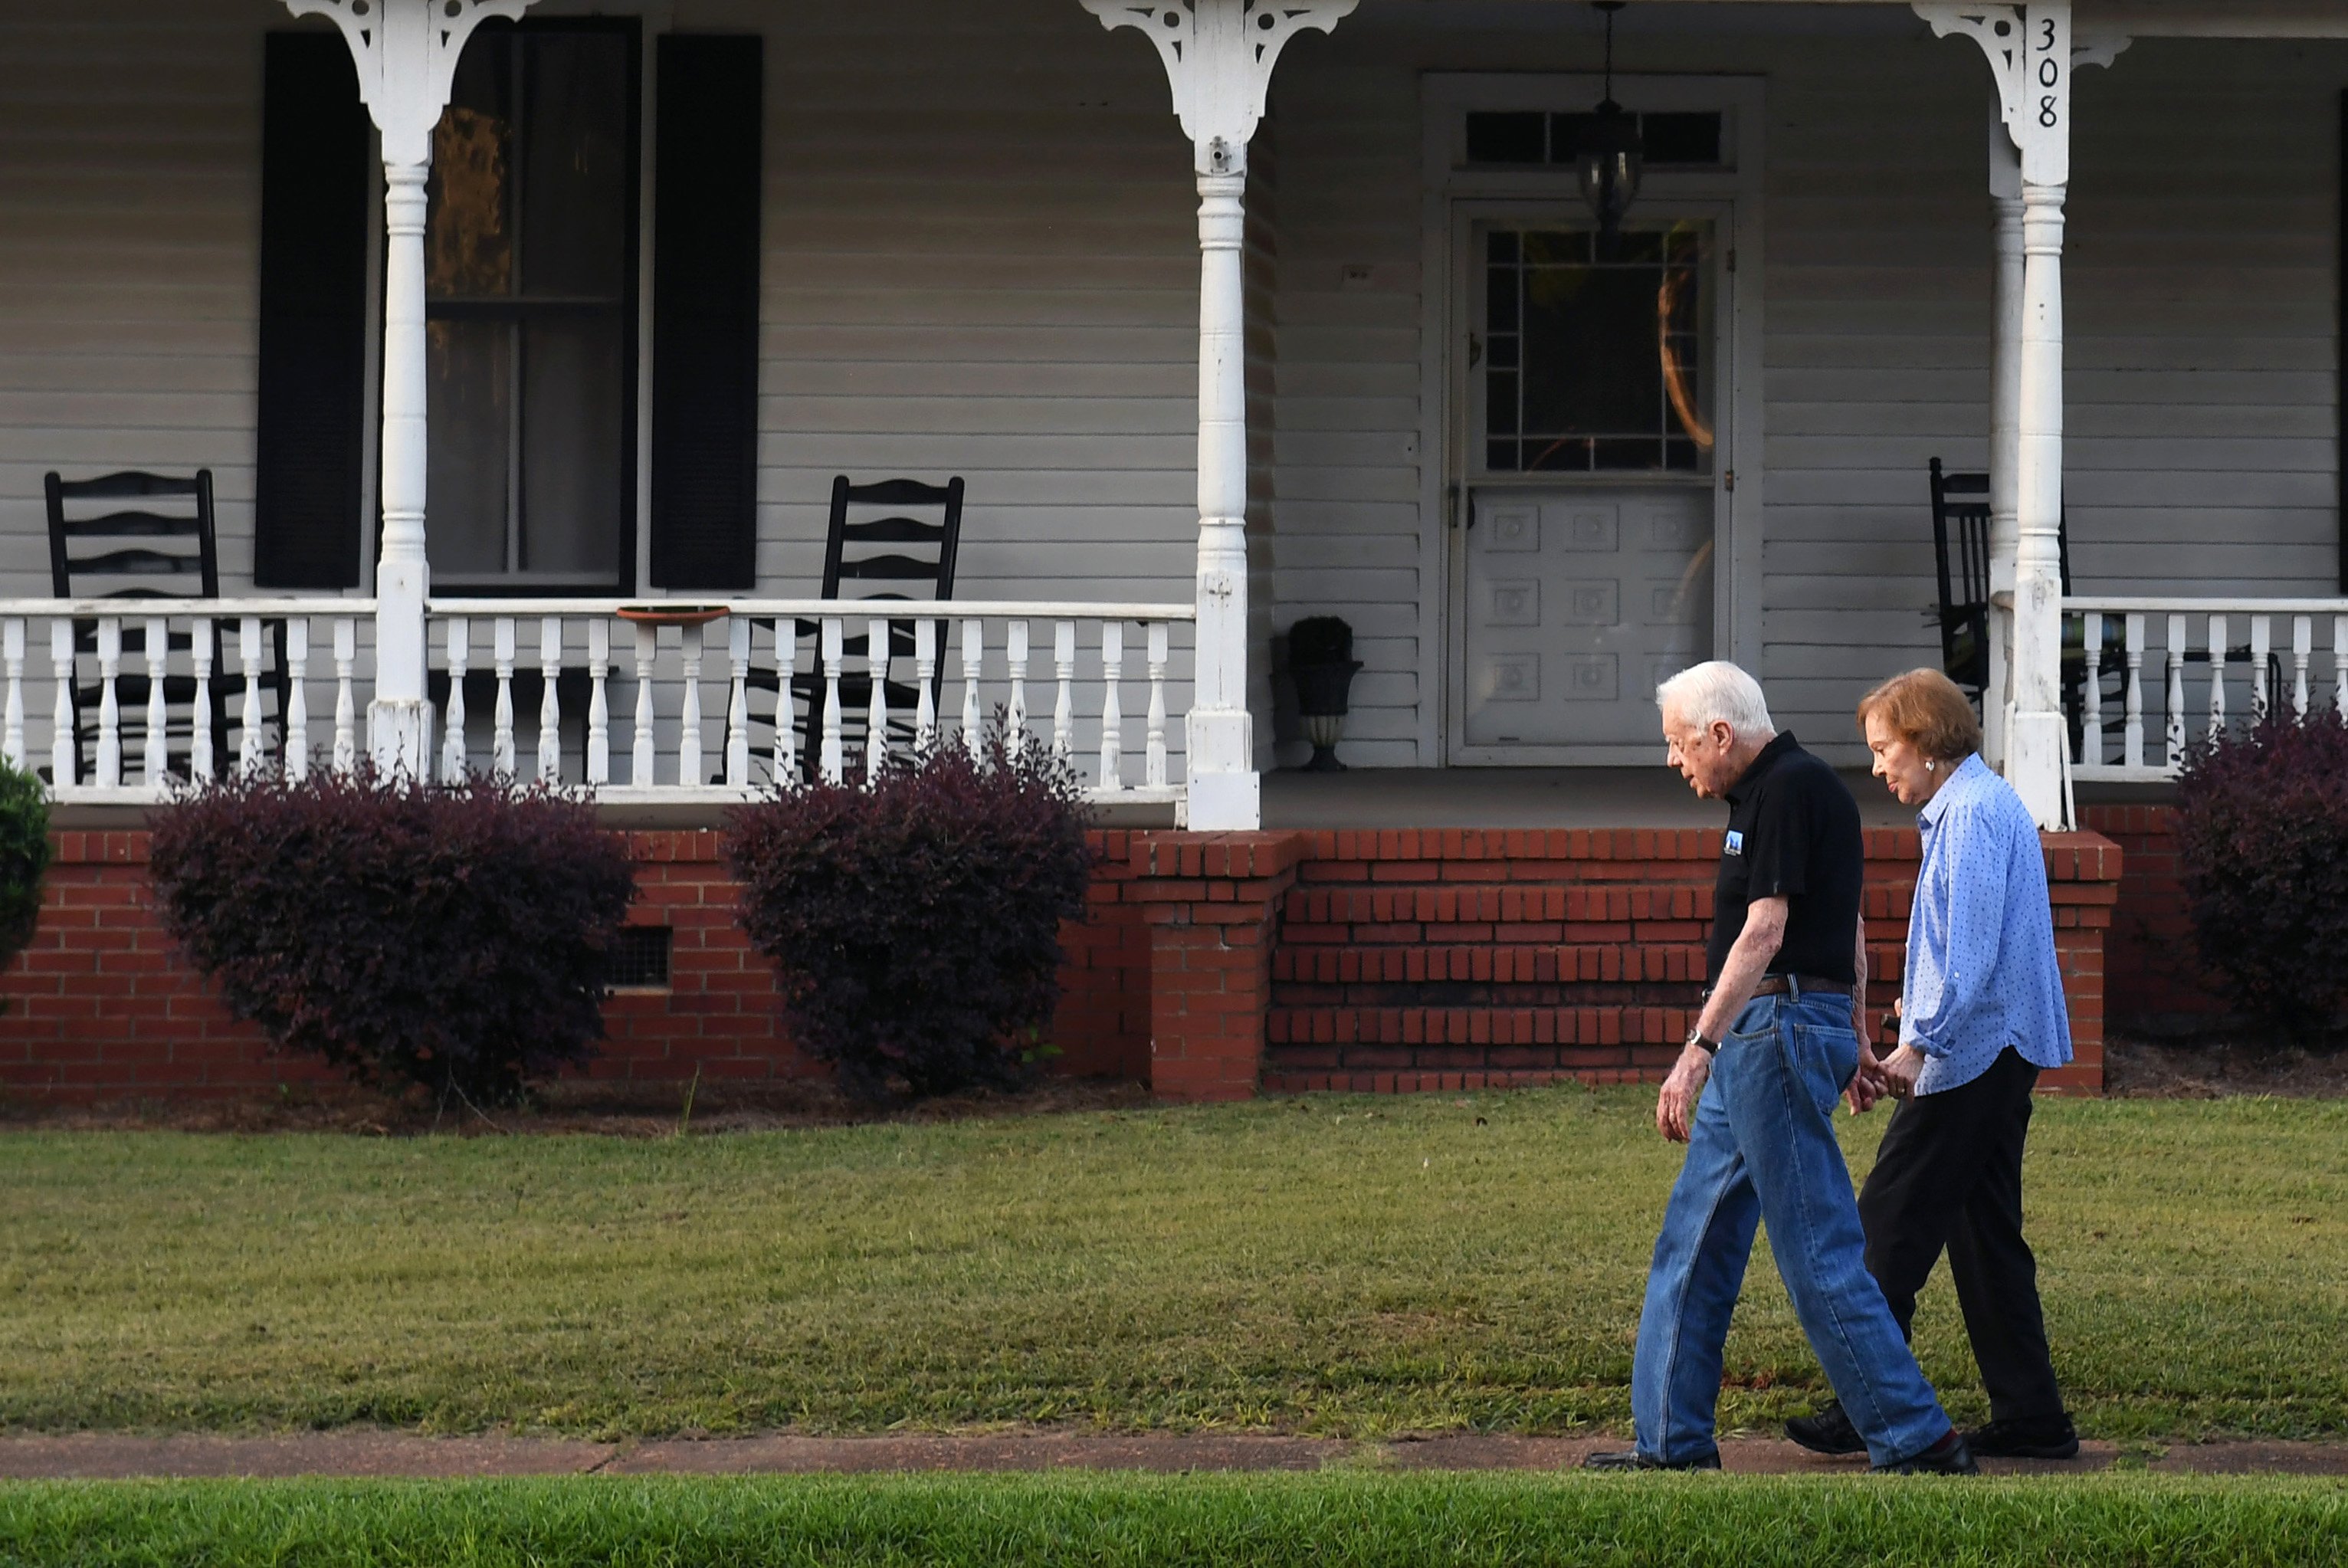 Former President of the United States, Jimmy Carter walks with his wife, former First Lady, Rosalynn Carter on Saturday August 04, 2018 in Plains, Georgia | Source: Getty Images 